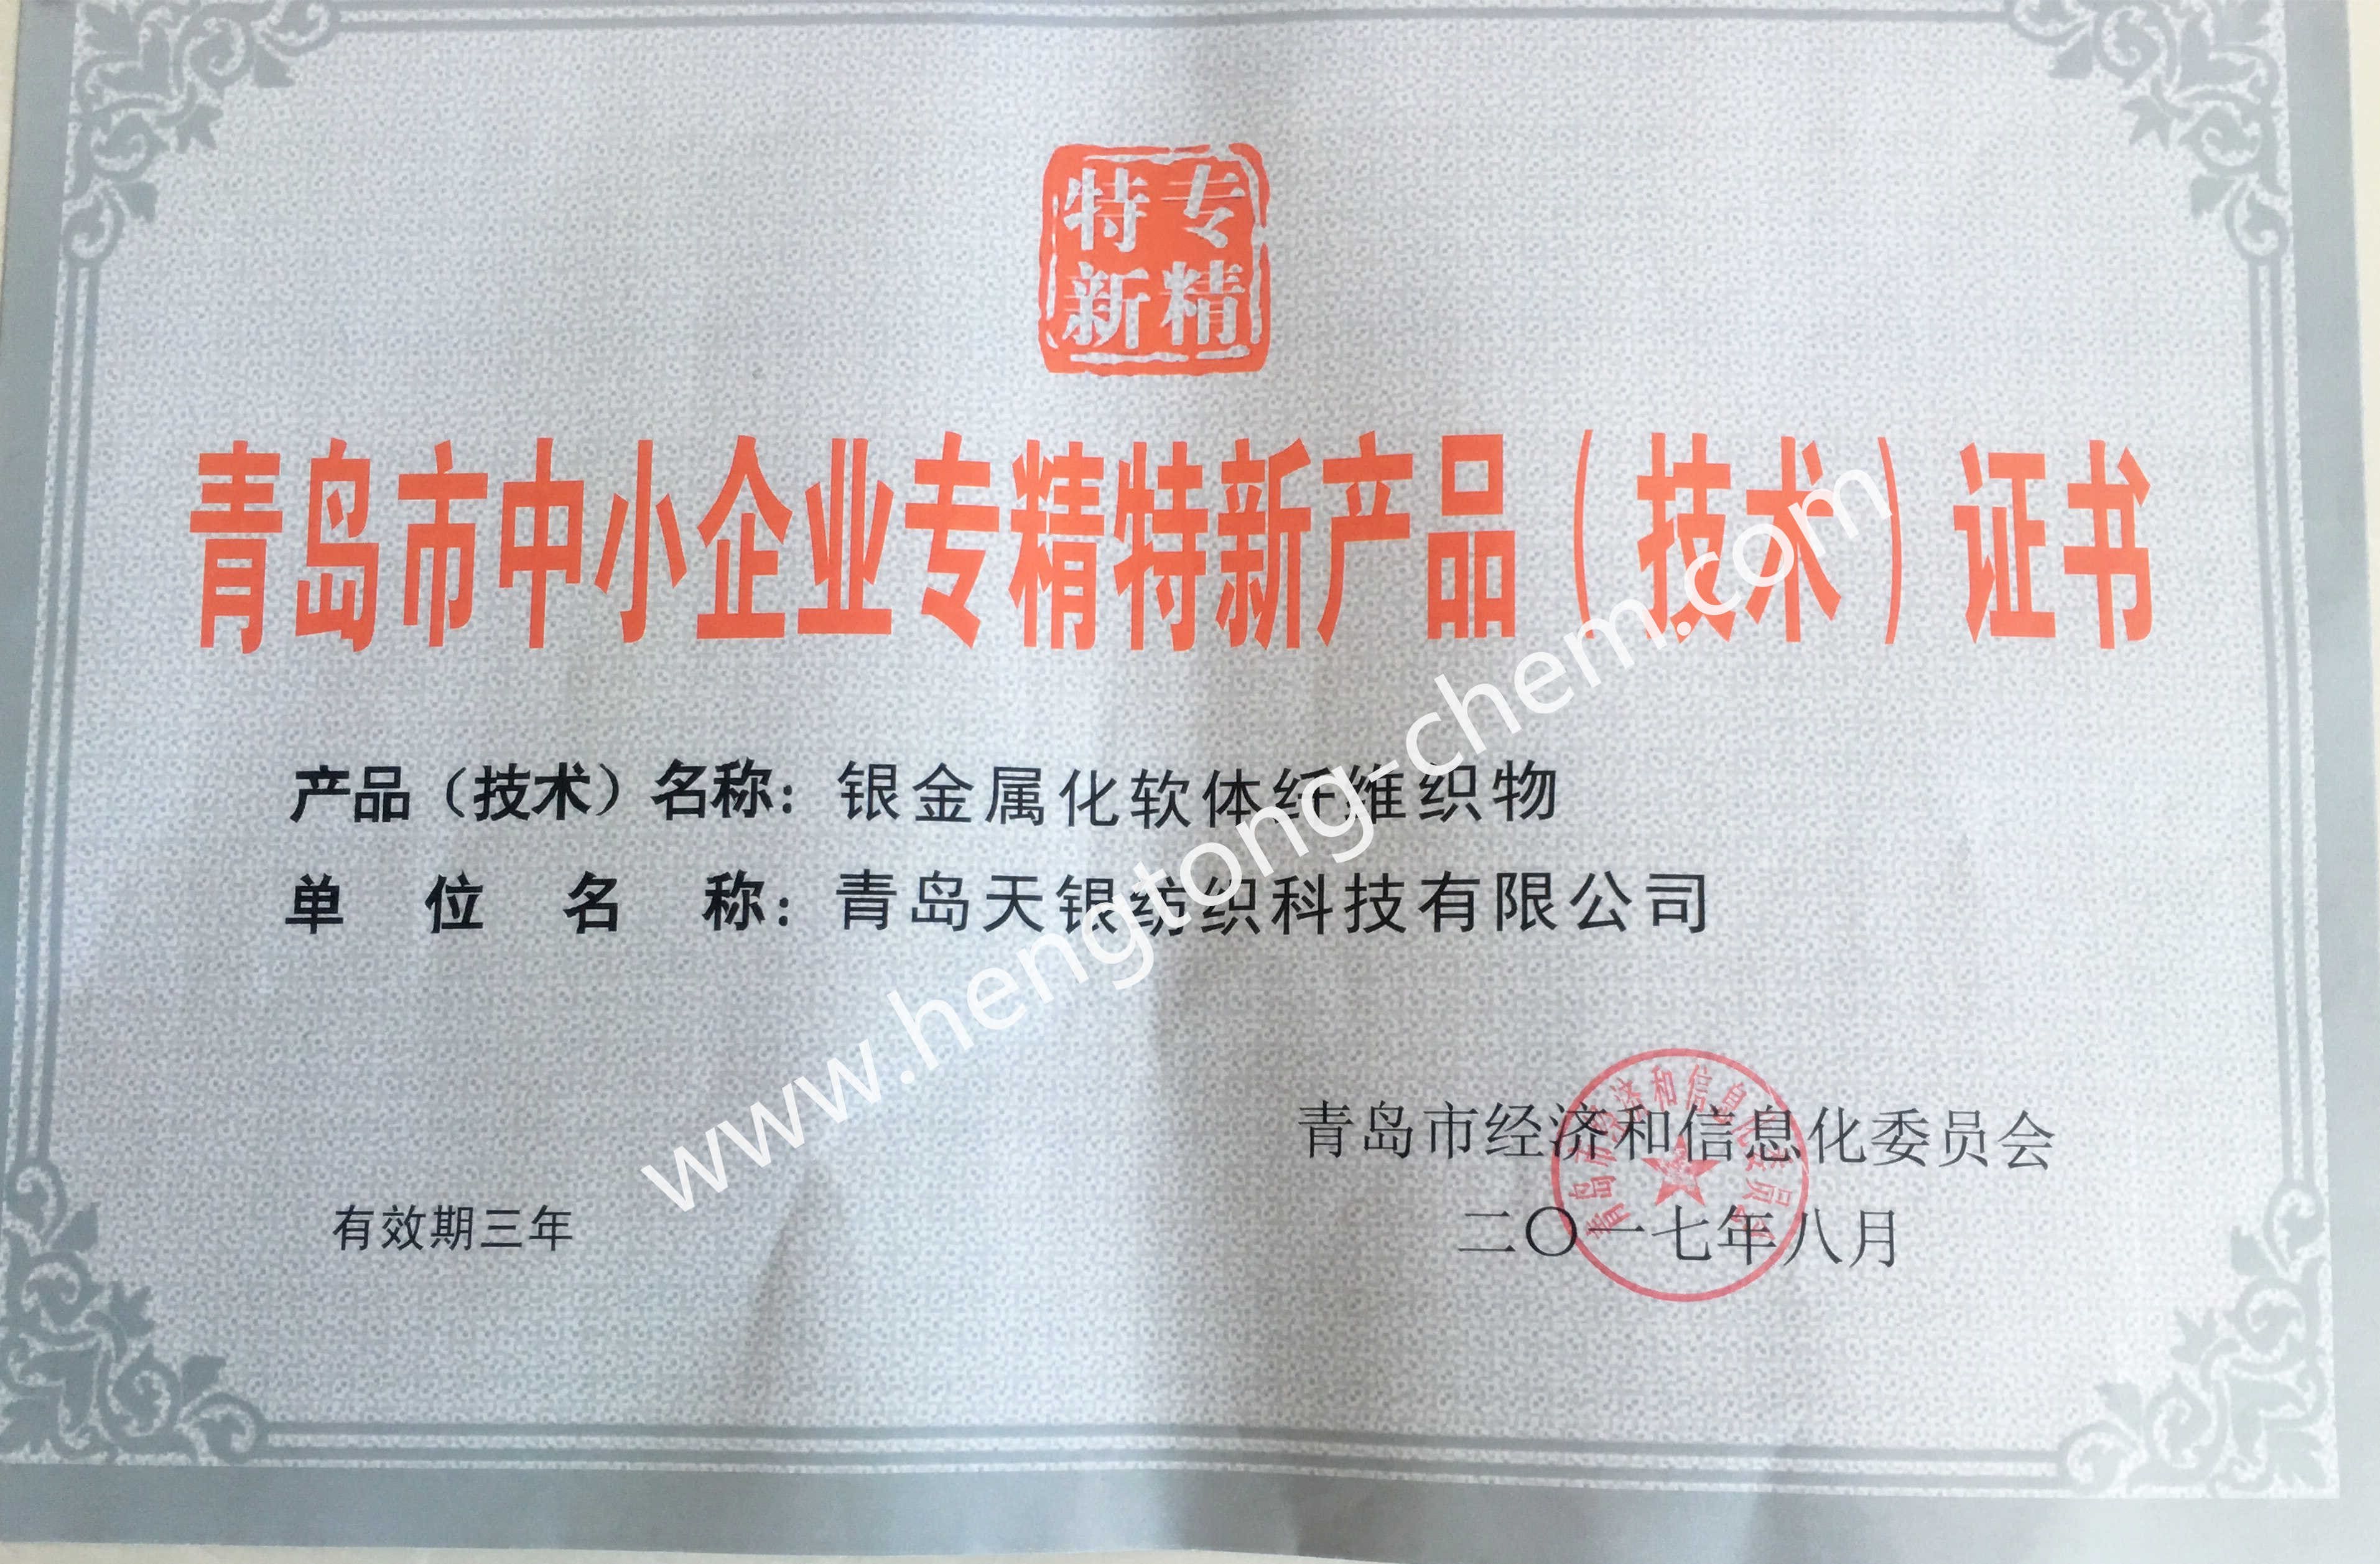 Qingdao small and medium-sized enterprises specialized special new products (technology) certificate